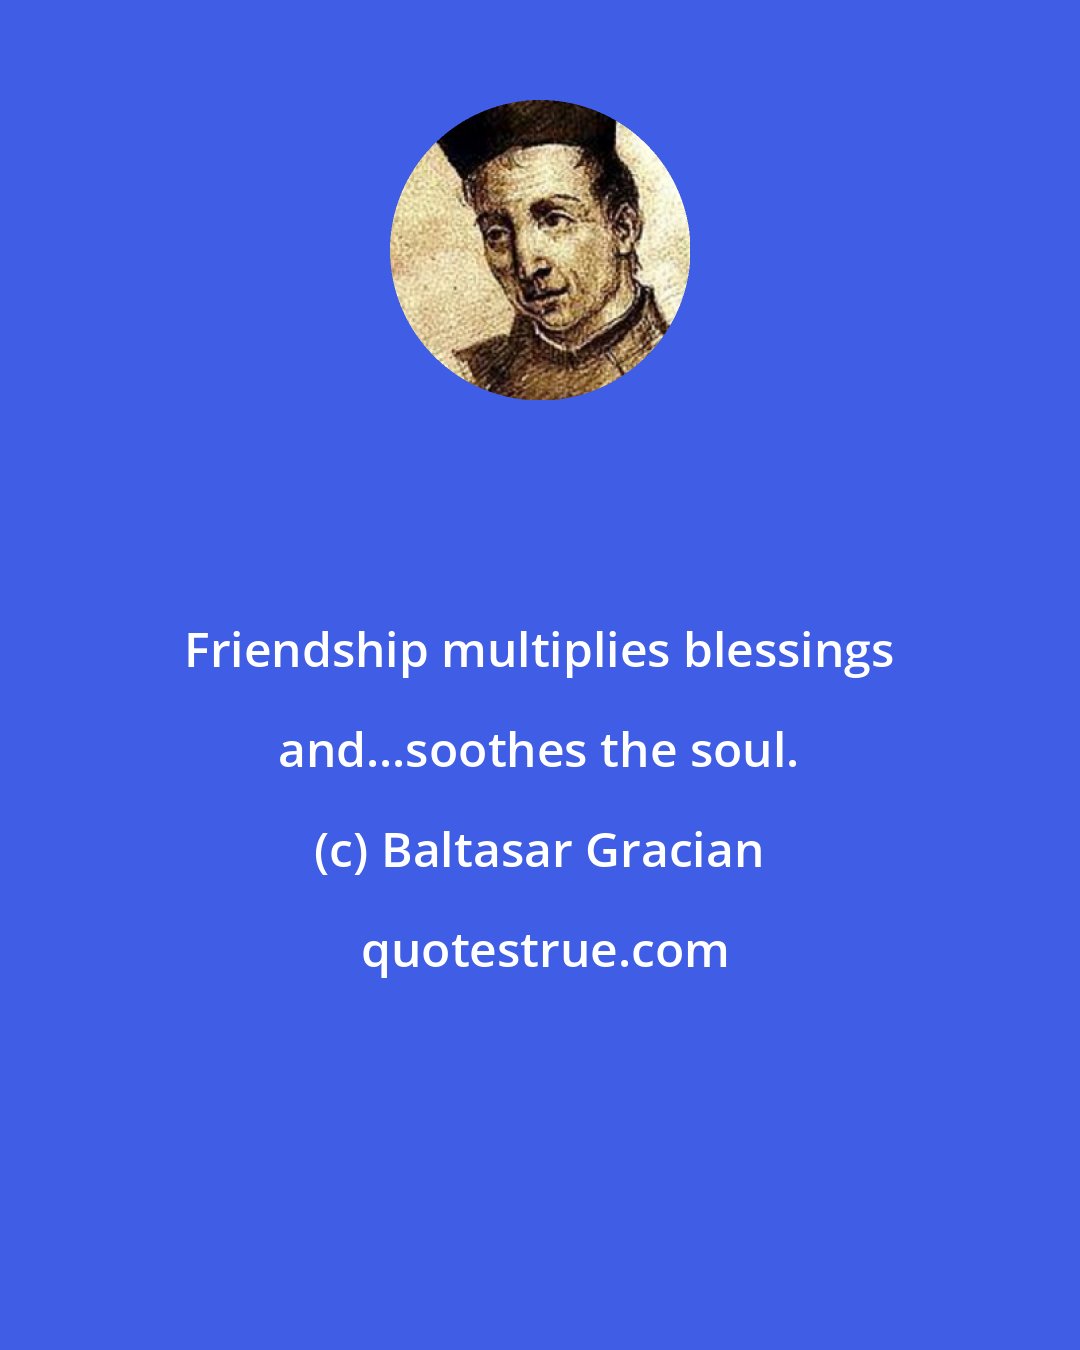 Baltasar Gracian: Friendship multiplies blessings and...soothes the soul.